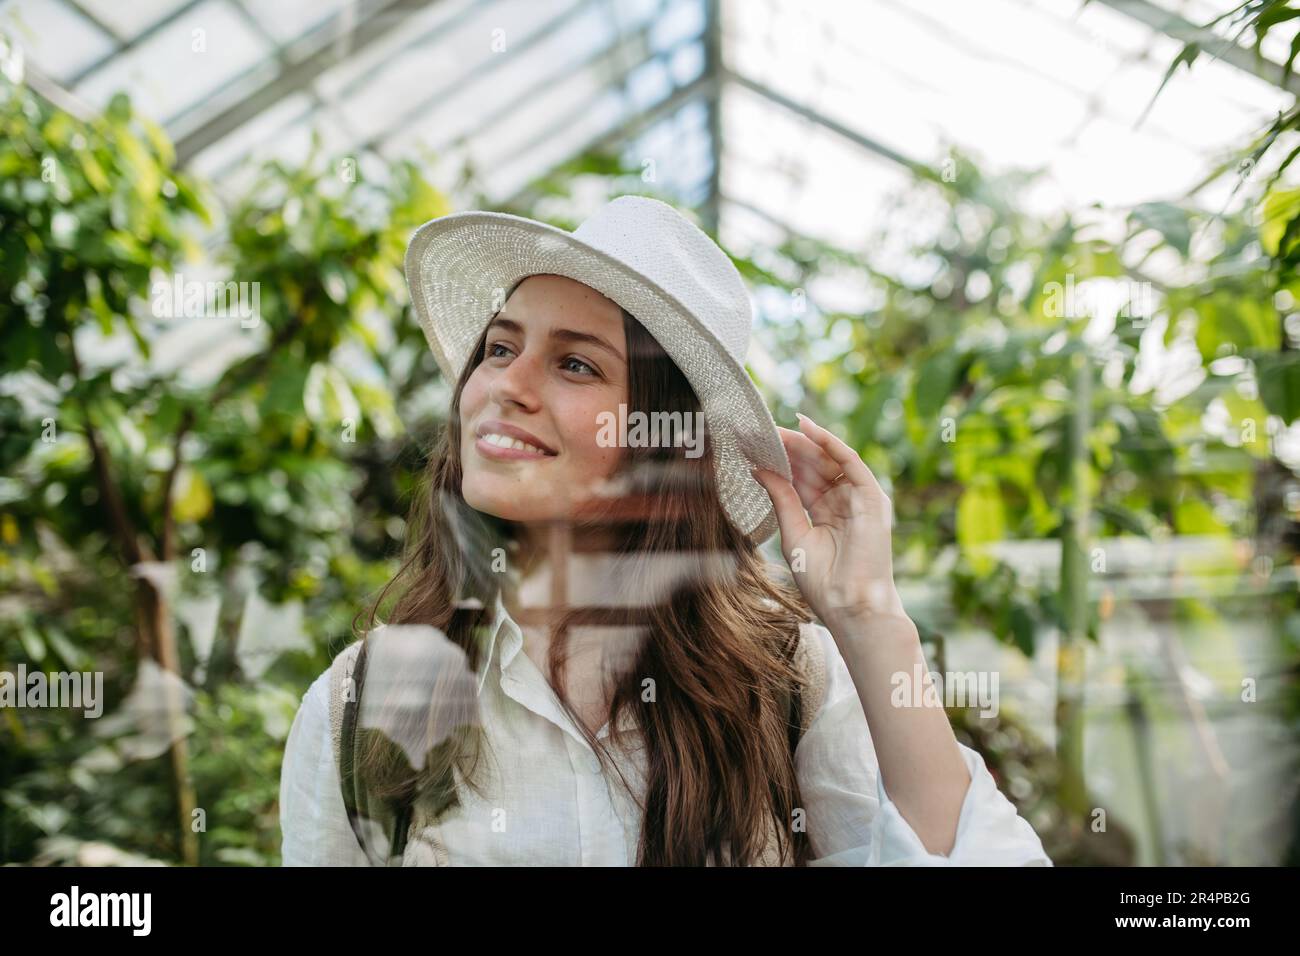 Portrait of young woman in botanical garden. Stock Photo